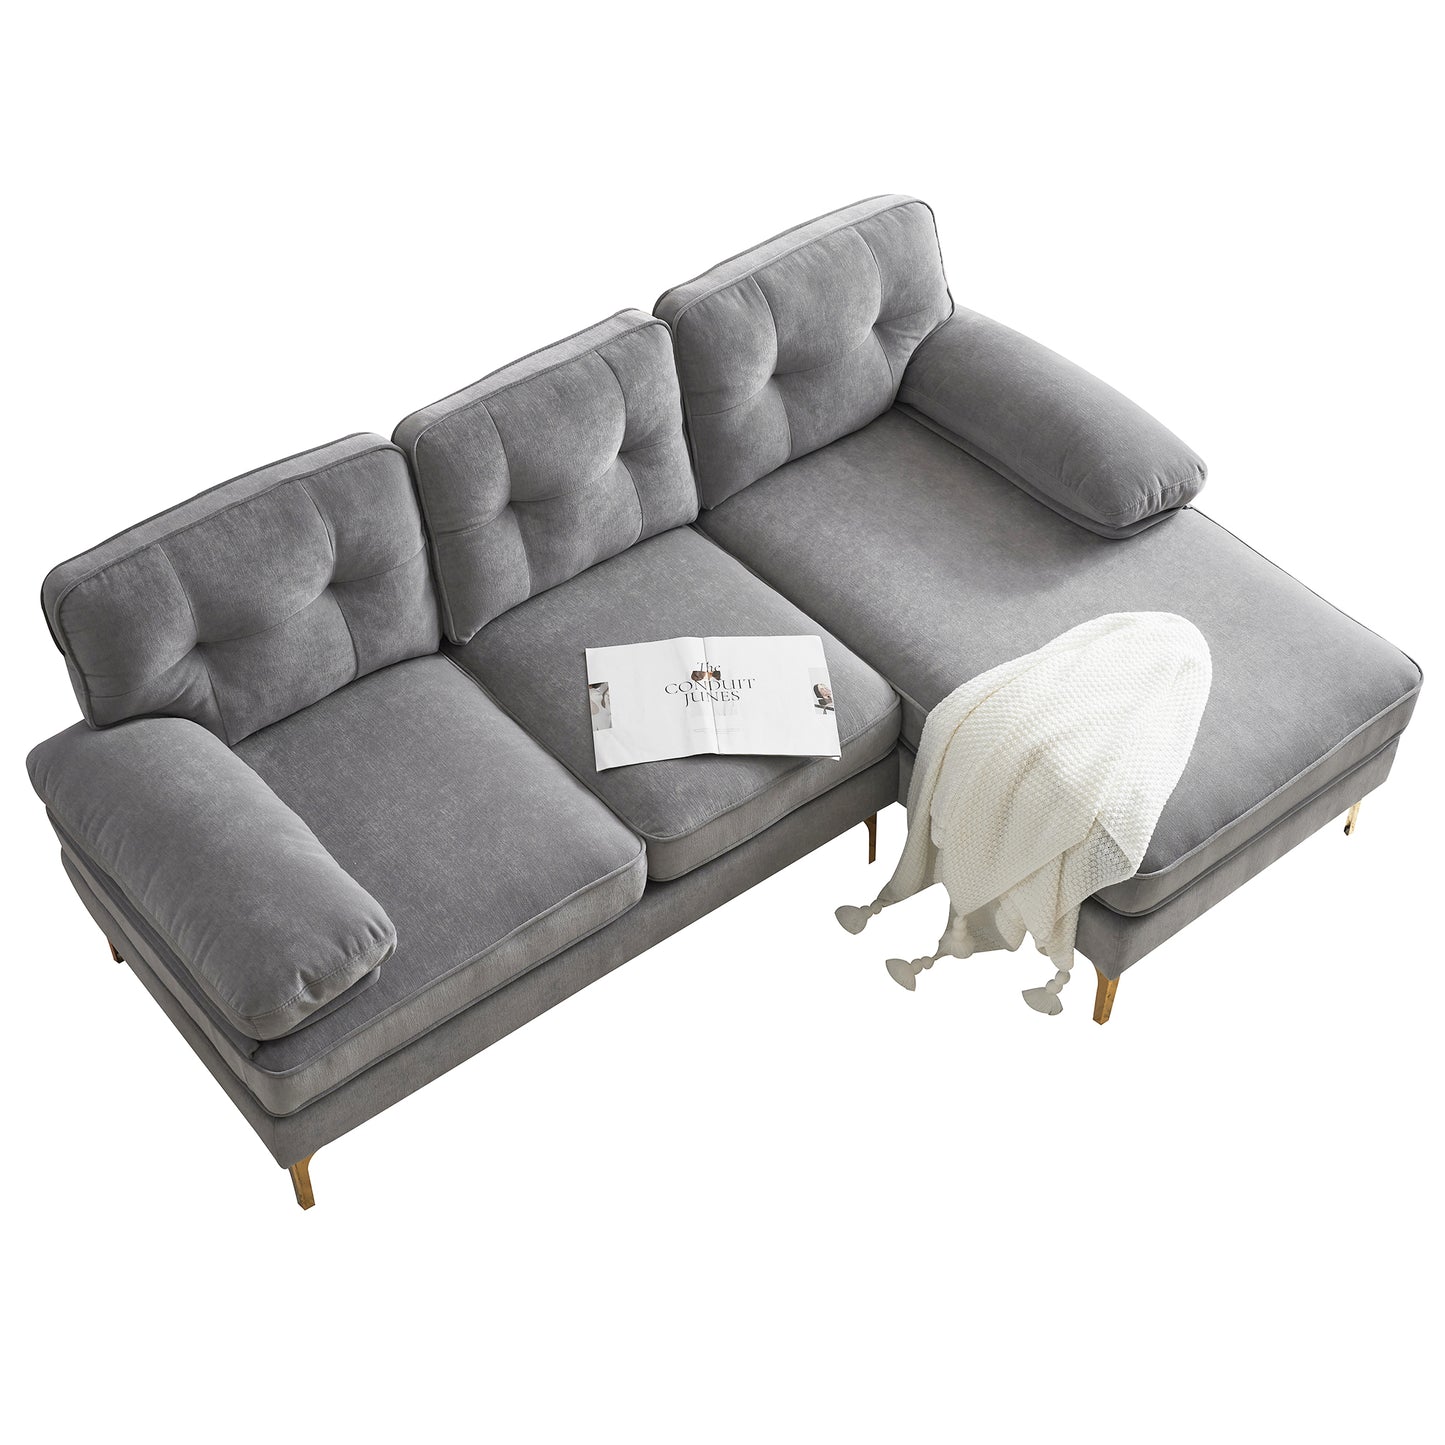 Modern Sectional Sofas Couches Velvet L Shaped Couches